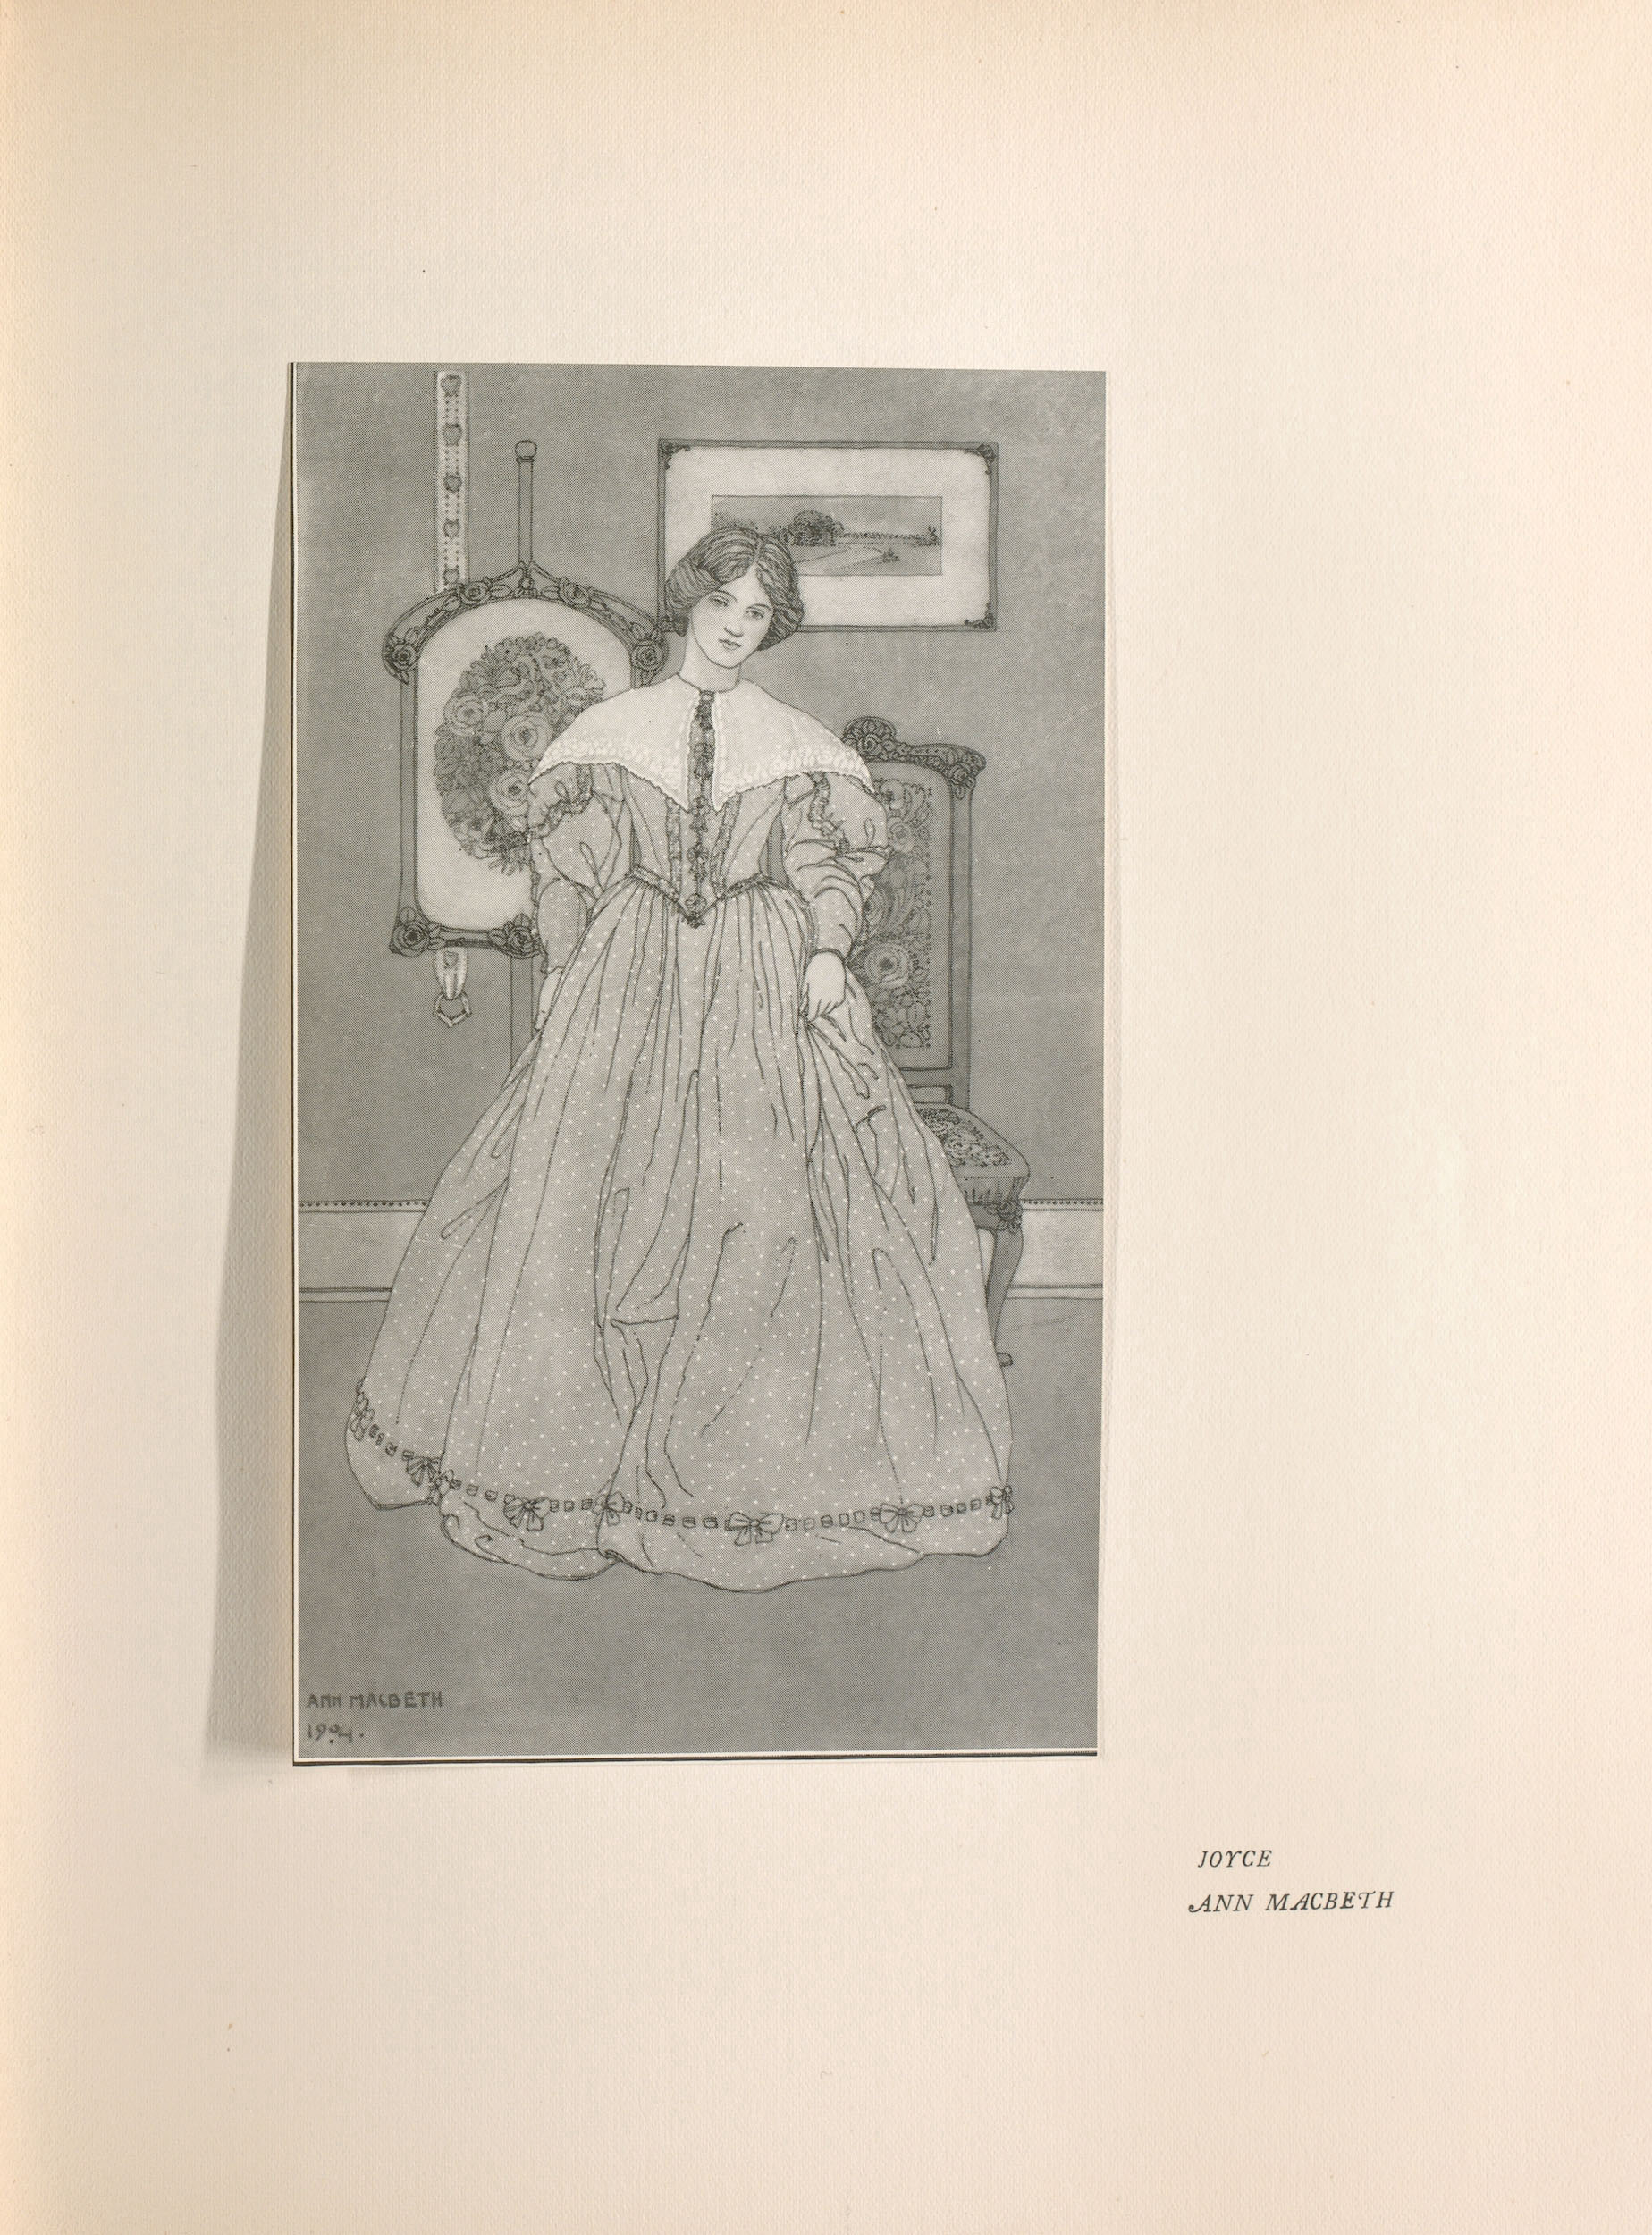 The tonal image is in portrait orientation and is centered on the page. A young woman in the foreground stands upright in an aesthetic drawing room, facing forward. She is wearing a full-length dotted gown with wide sleeves and a cinched waistline; the bottom edge of the gown is threaded with a ribbon and bows.. Her shoulders are covered with a white shawl. Behind the woman, there is a wooden chair upholstered in a floral textile. Two works of art are hung on the wall behind her: a small framed landscape painting and a framed piece of floral embroidery. The artist’s signature, “Ann Macbeth”, and the date, “1904,” are inscribed in the bottom left corner of the image.